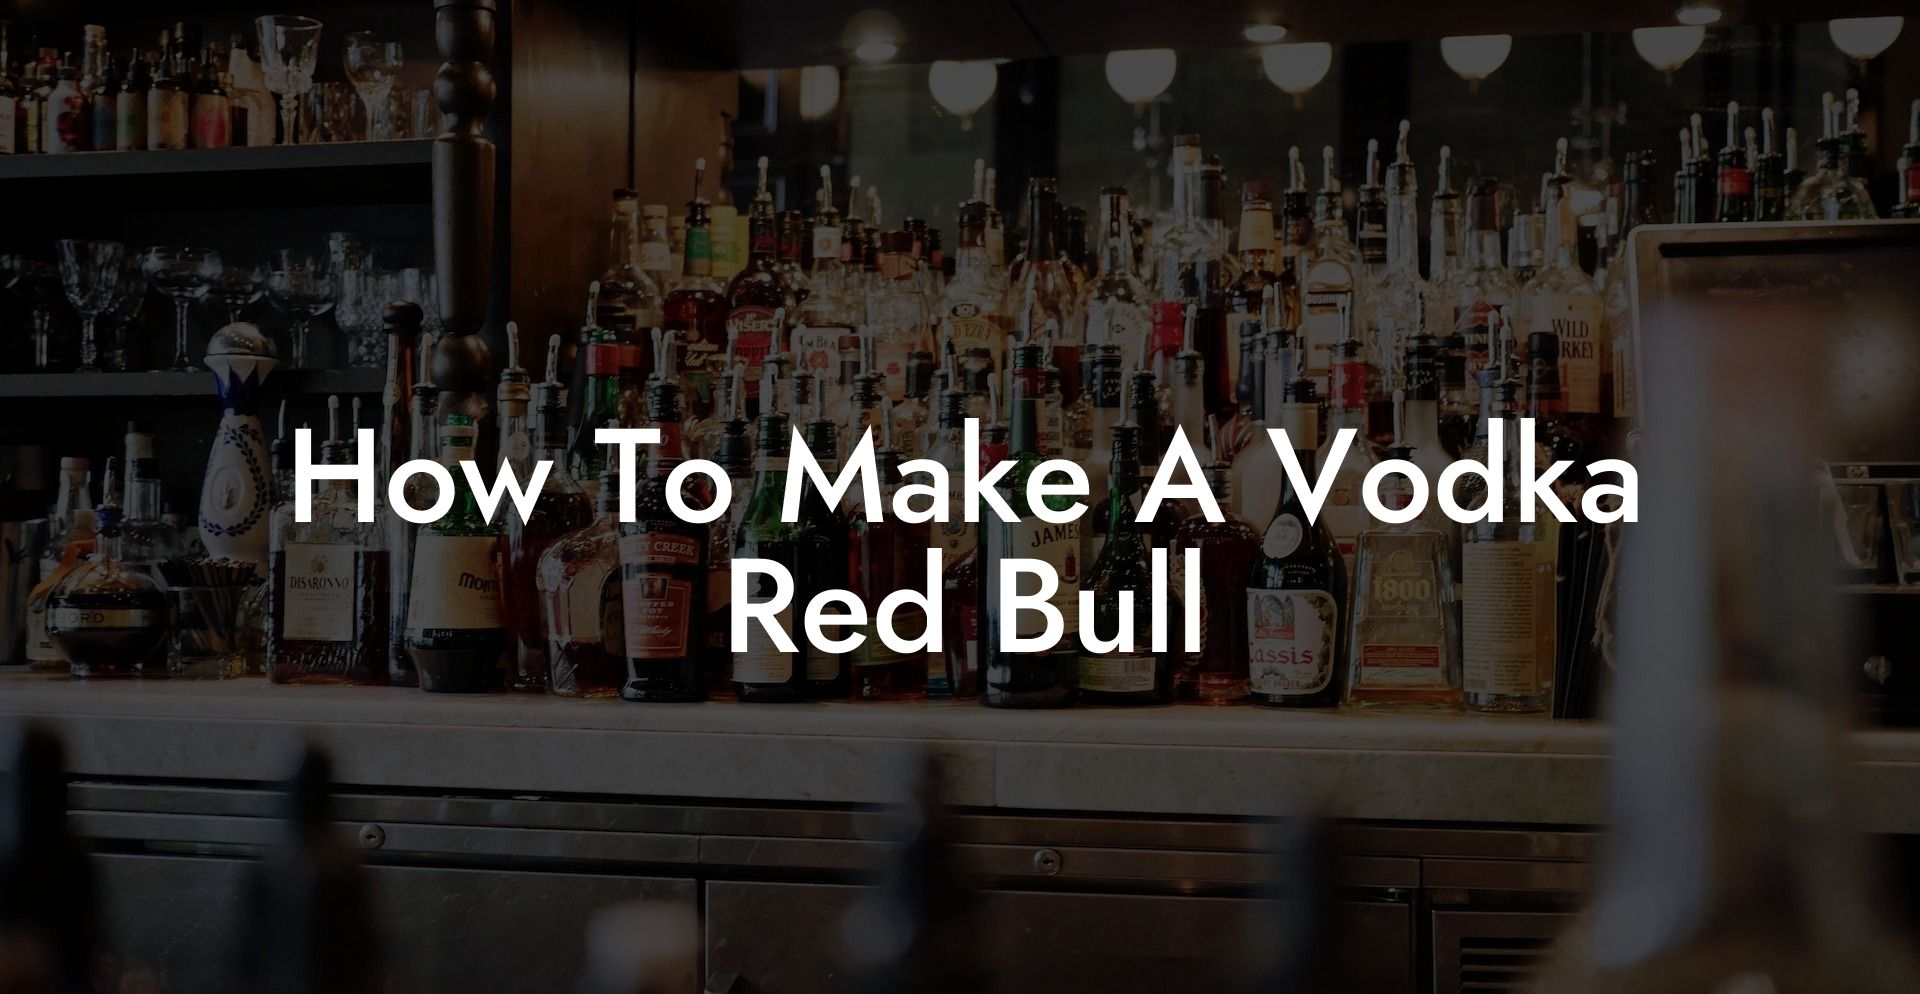 How To Make A Vodka Red Bull